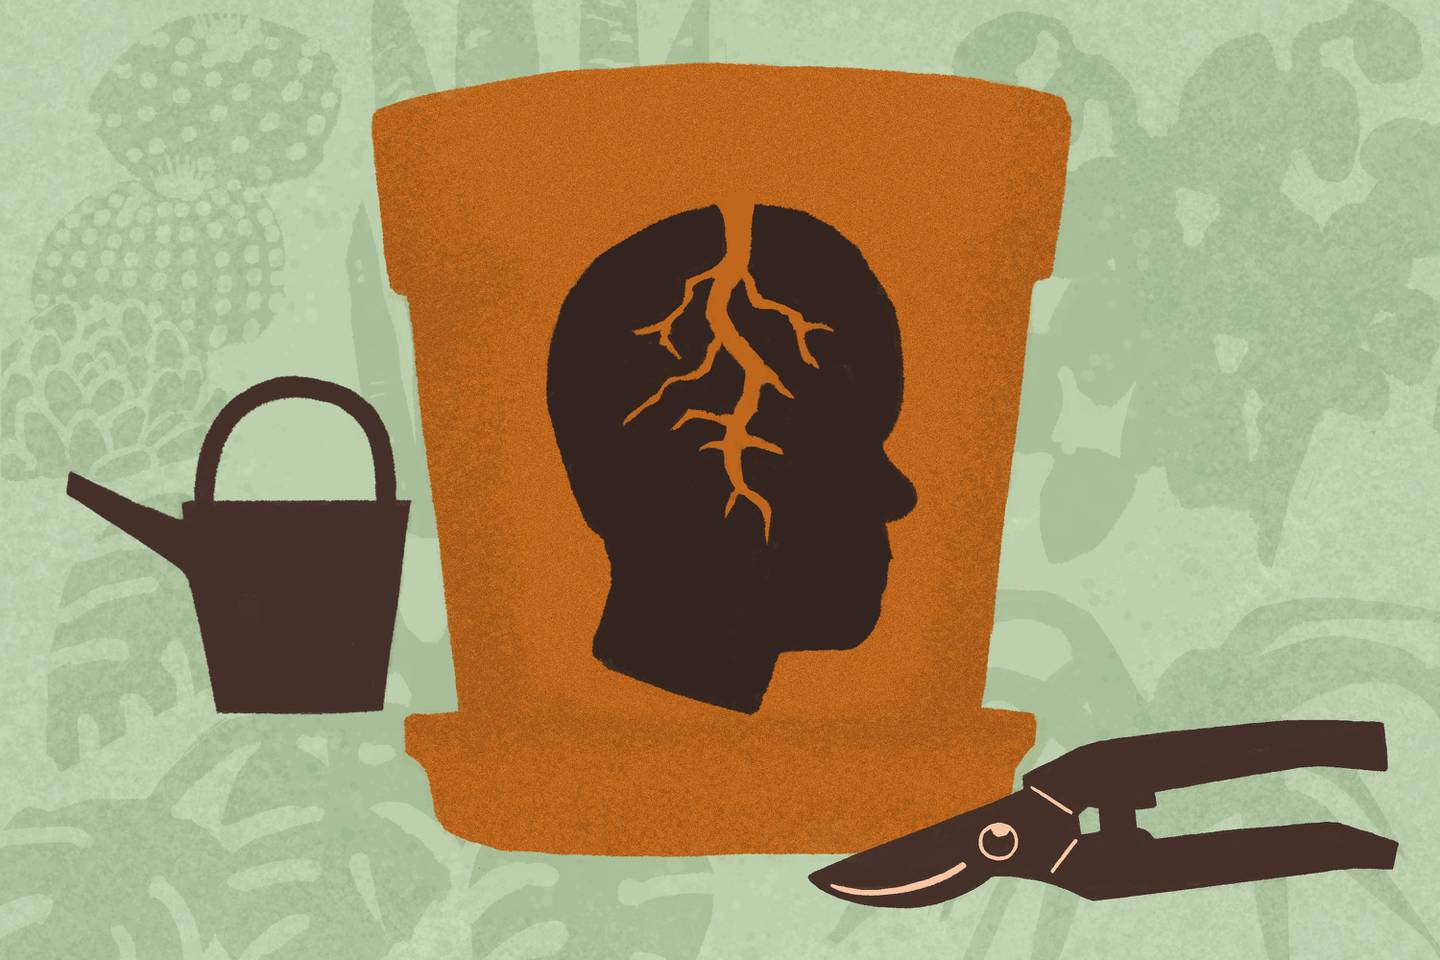 Illustration shows a boy’s profile, with roots growing from the top of his head, on the side of a terracotta plant pot. Pot is flanked by watering can and garden shears, and there are plants in the background.